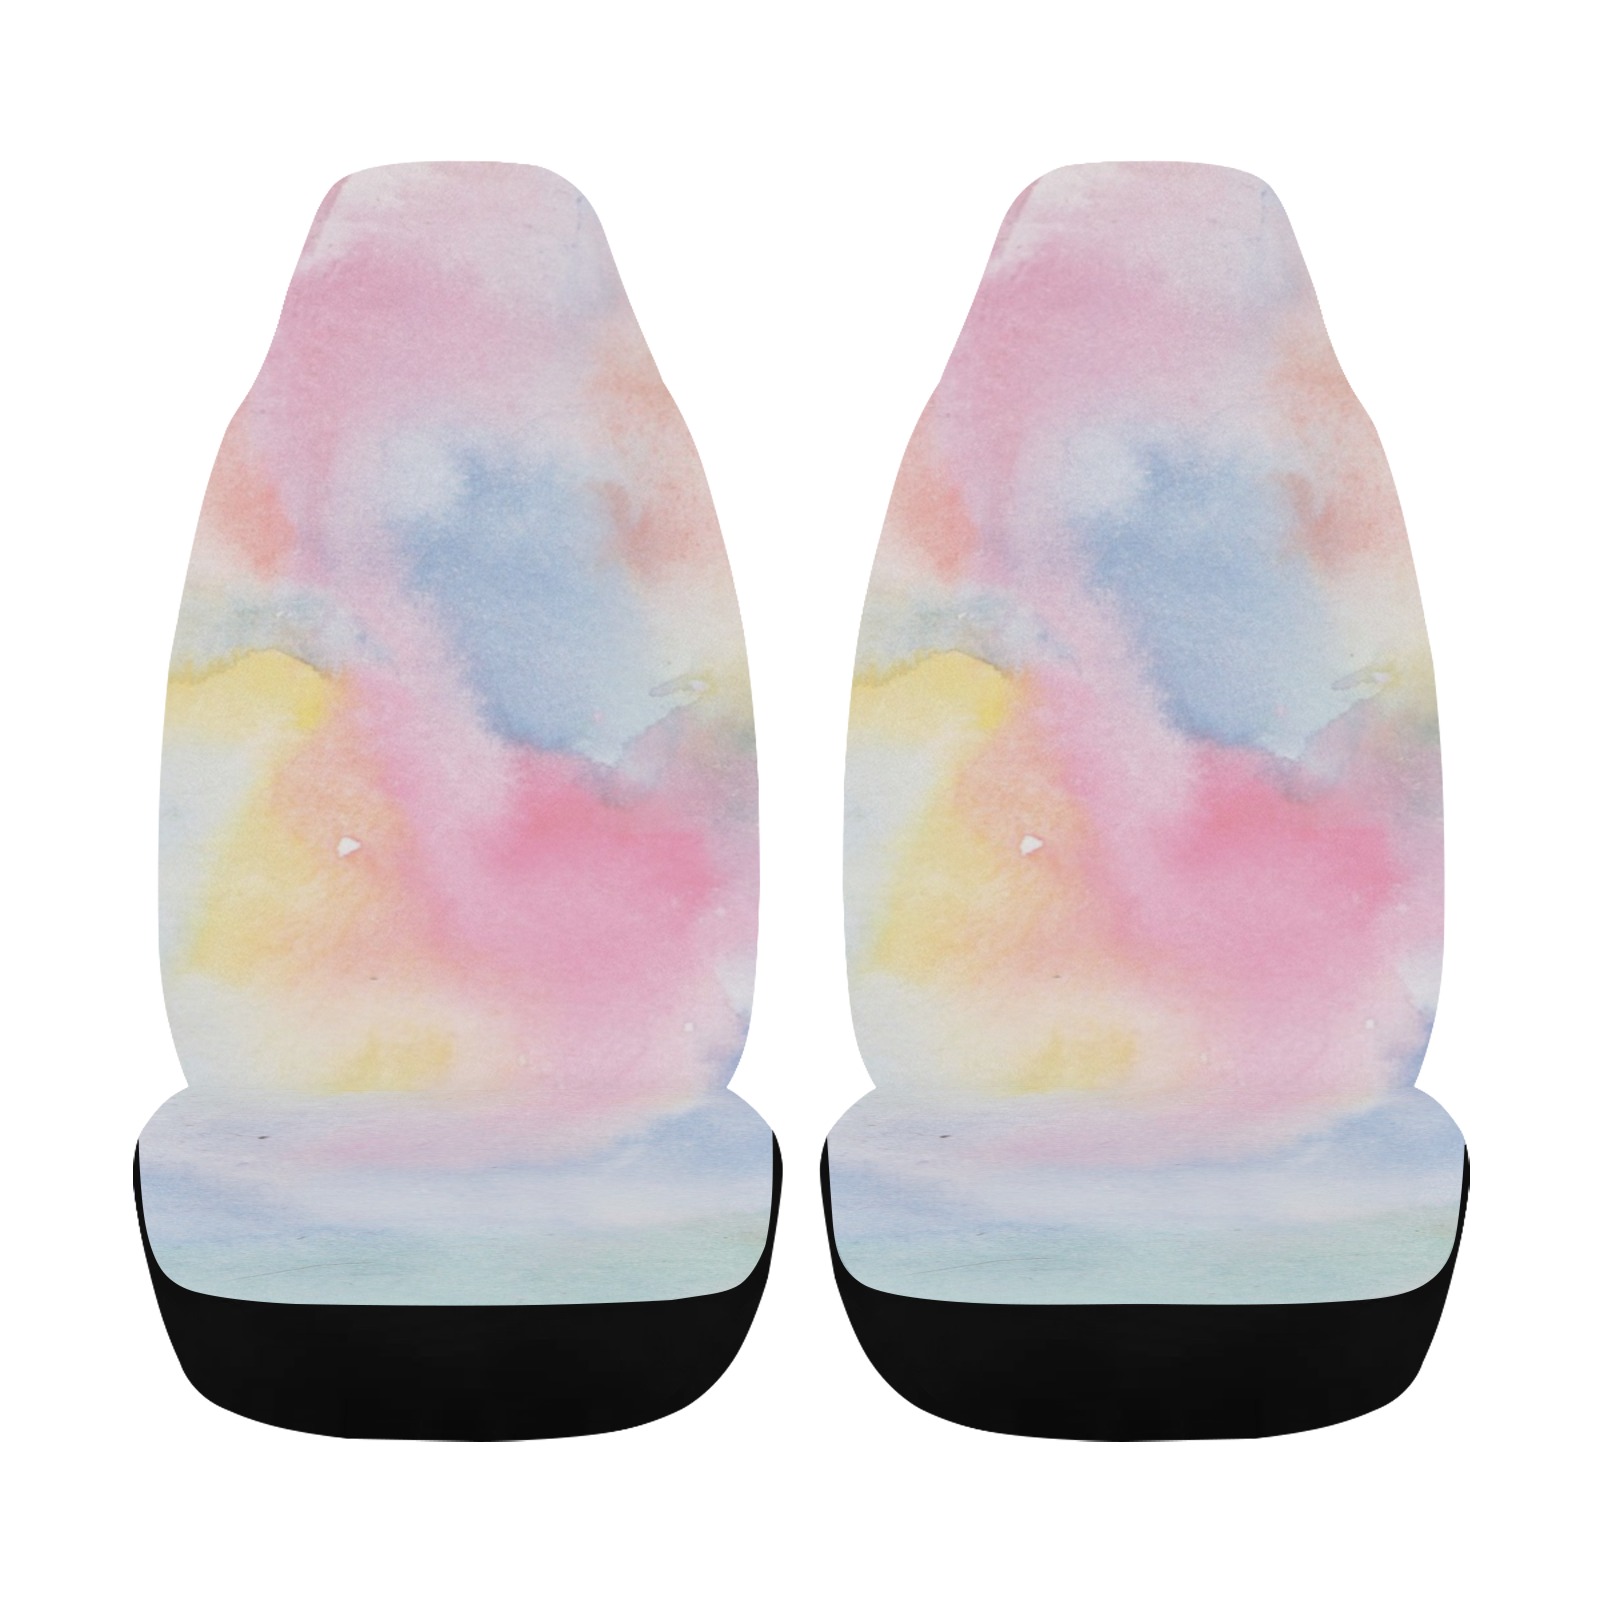 Colorful watercolor Car Seat Cover Airbag Compatible (Set of 2)